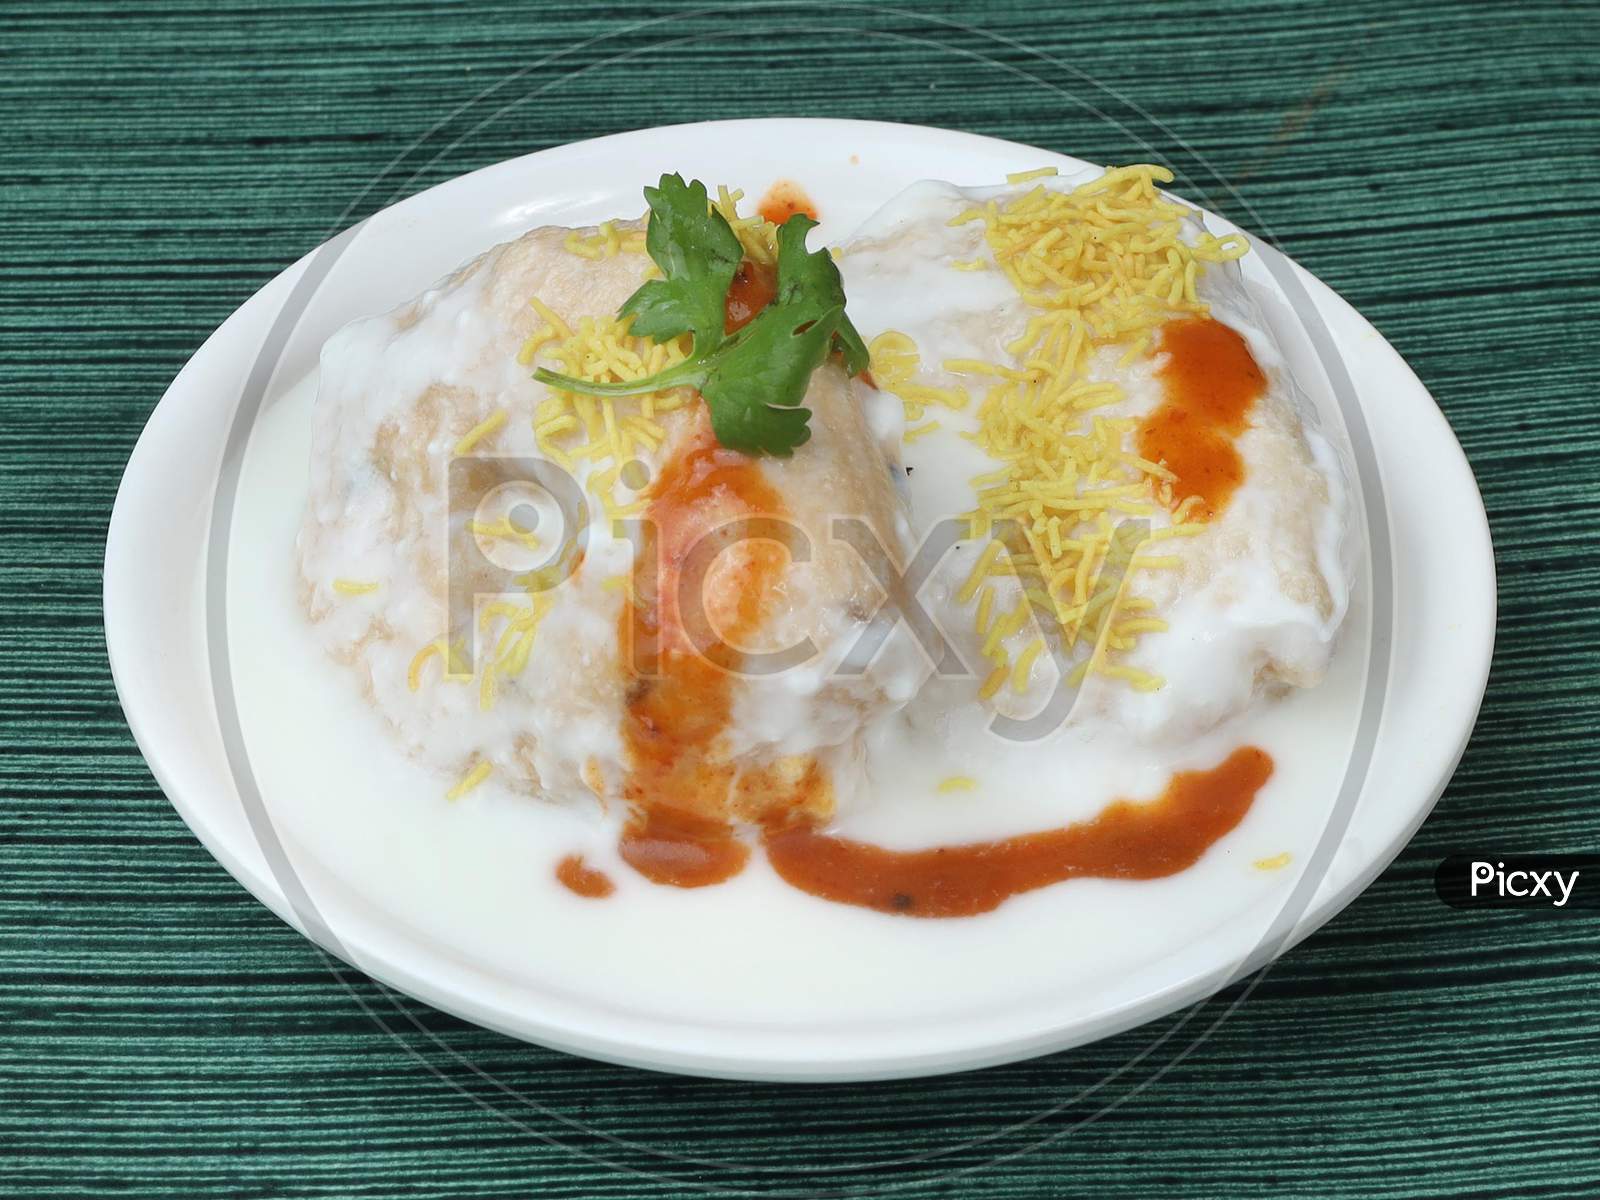 Dahi Vada Or Bhalla Is A Popular Snack In India. It Is Prepared By Soaking Vadas In Thick Dahi / Curd. Garnished With Coriander Leaves, Grated Carrots And Kara Boondi With Tamarind Chutney, Selective Focus